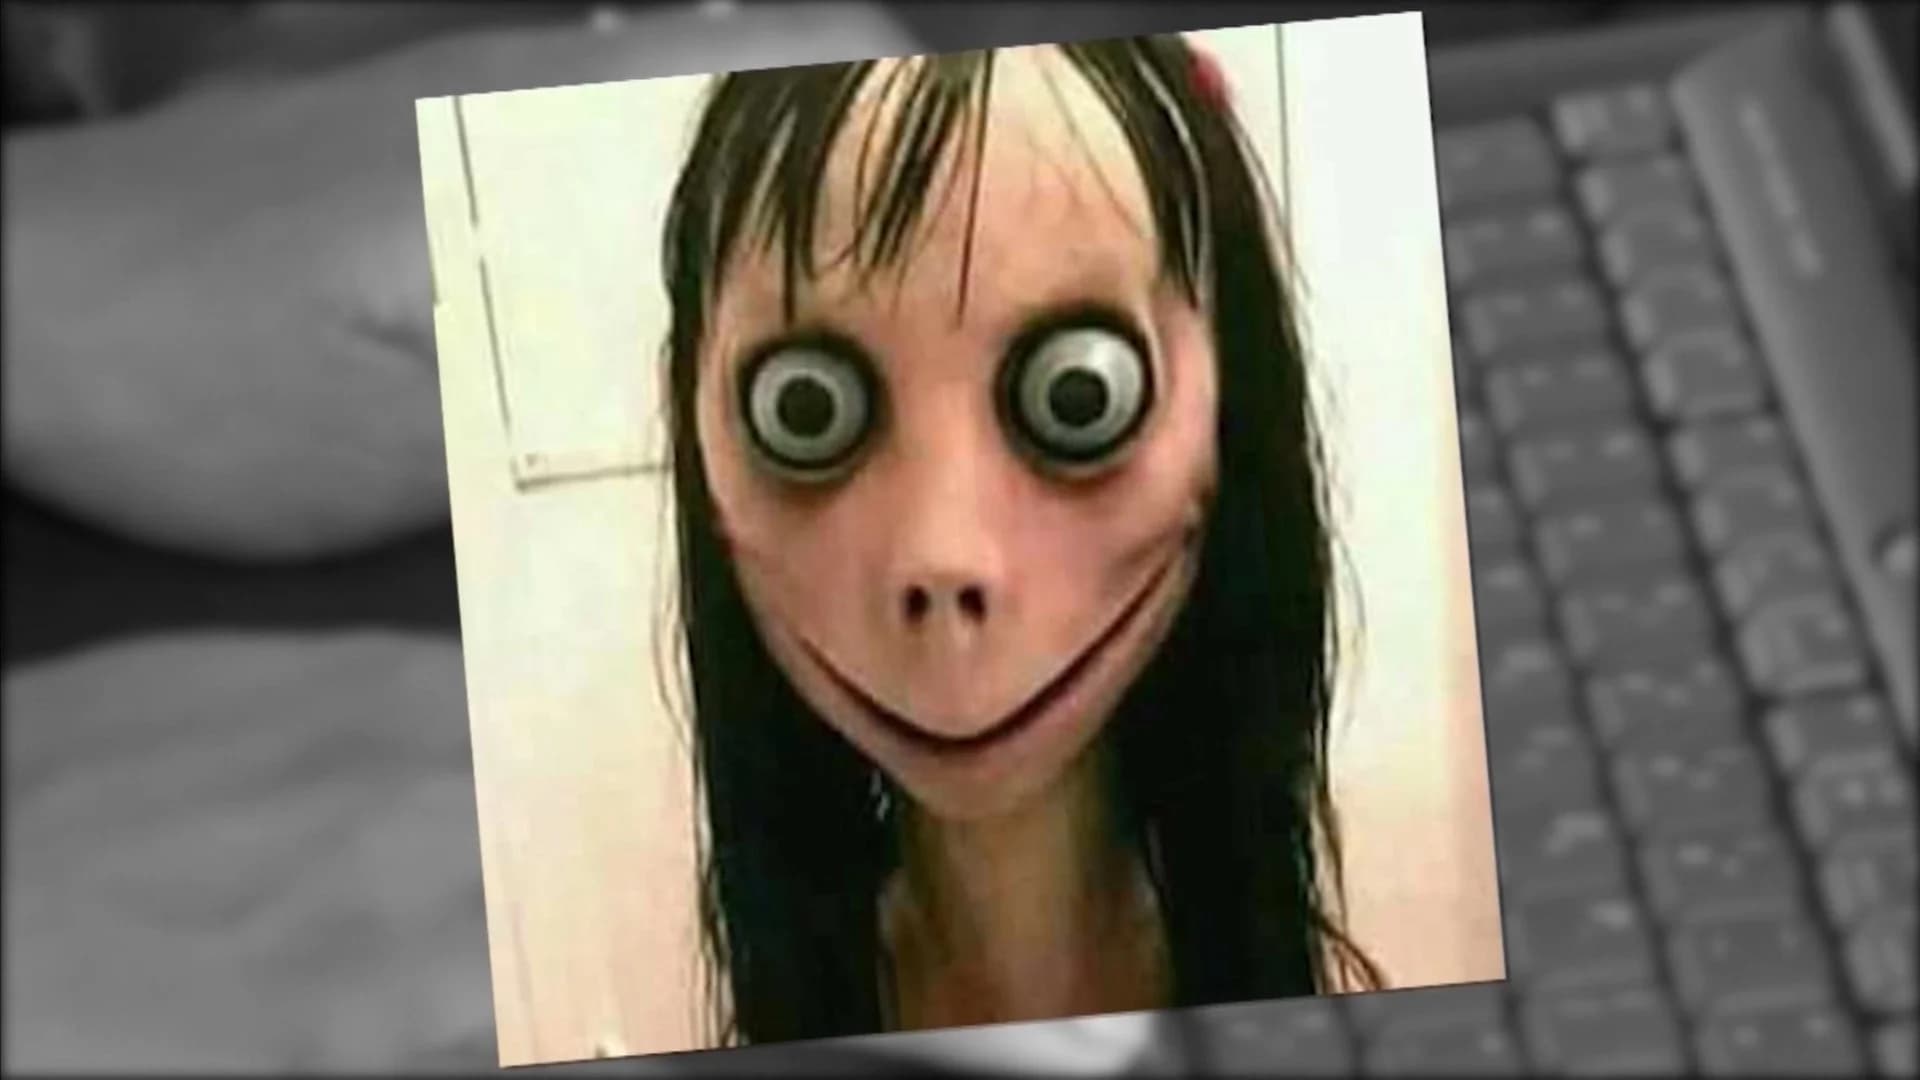 YouTube: ‘No evidence’ of Momo Challenge videos on the site